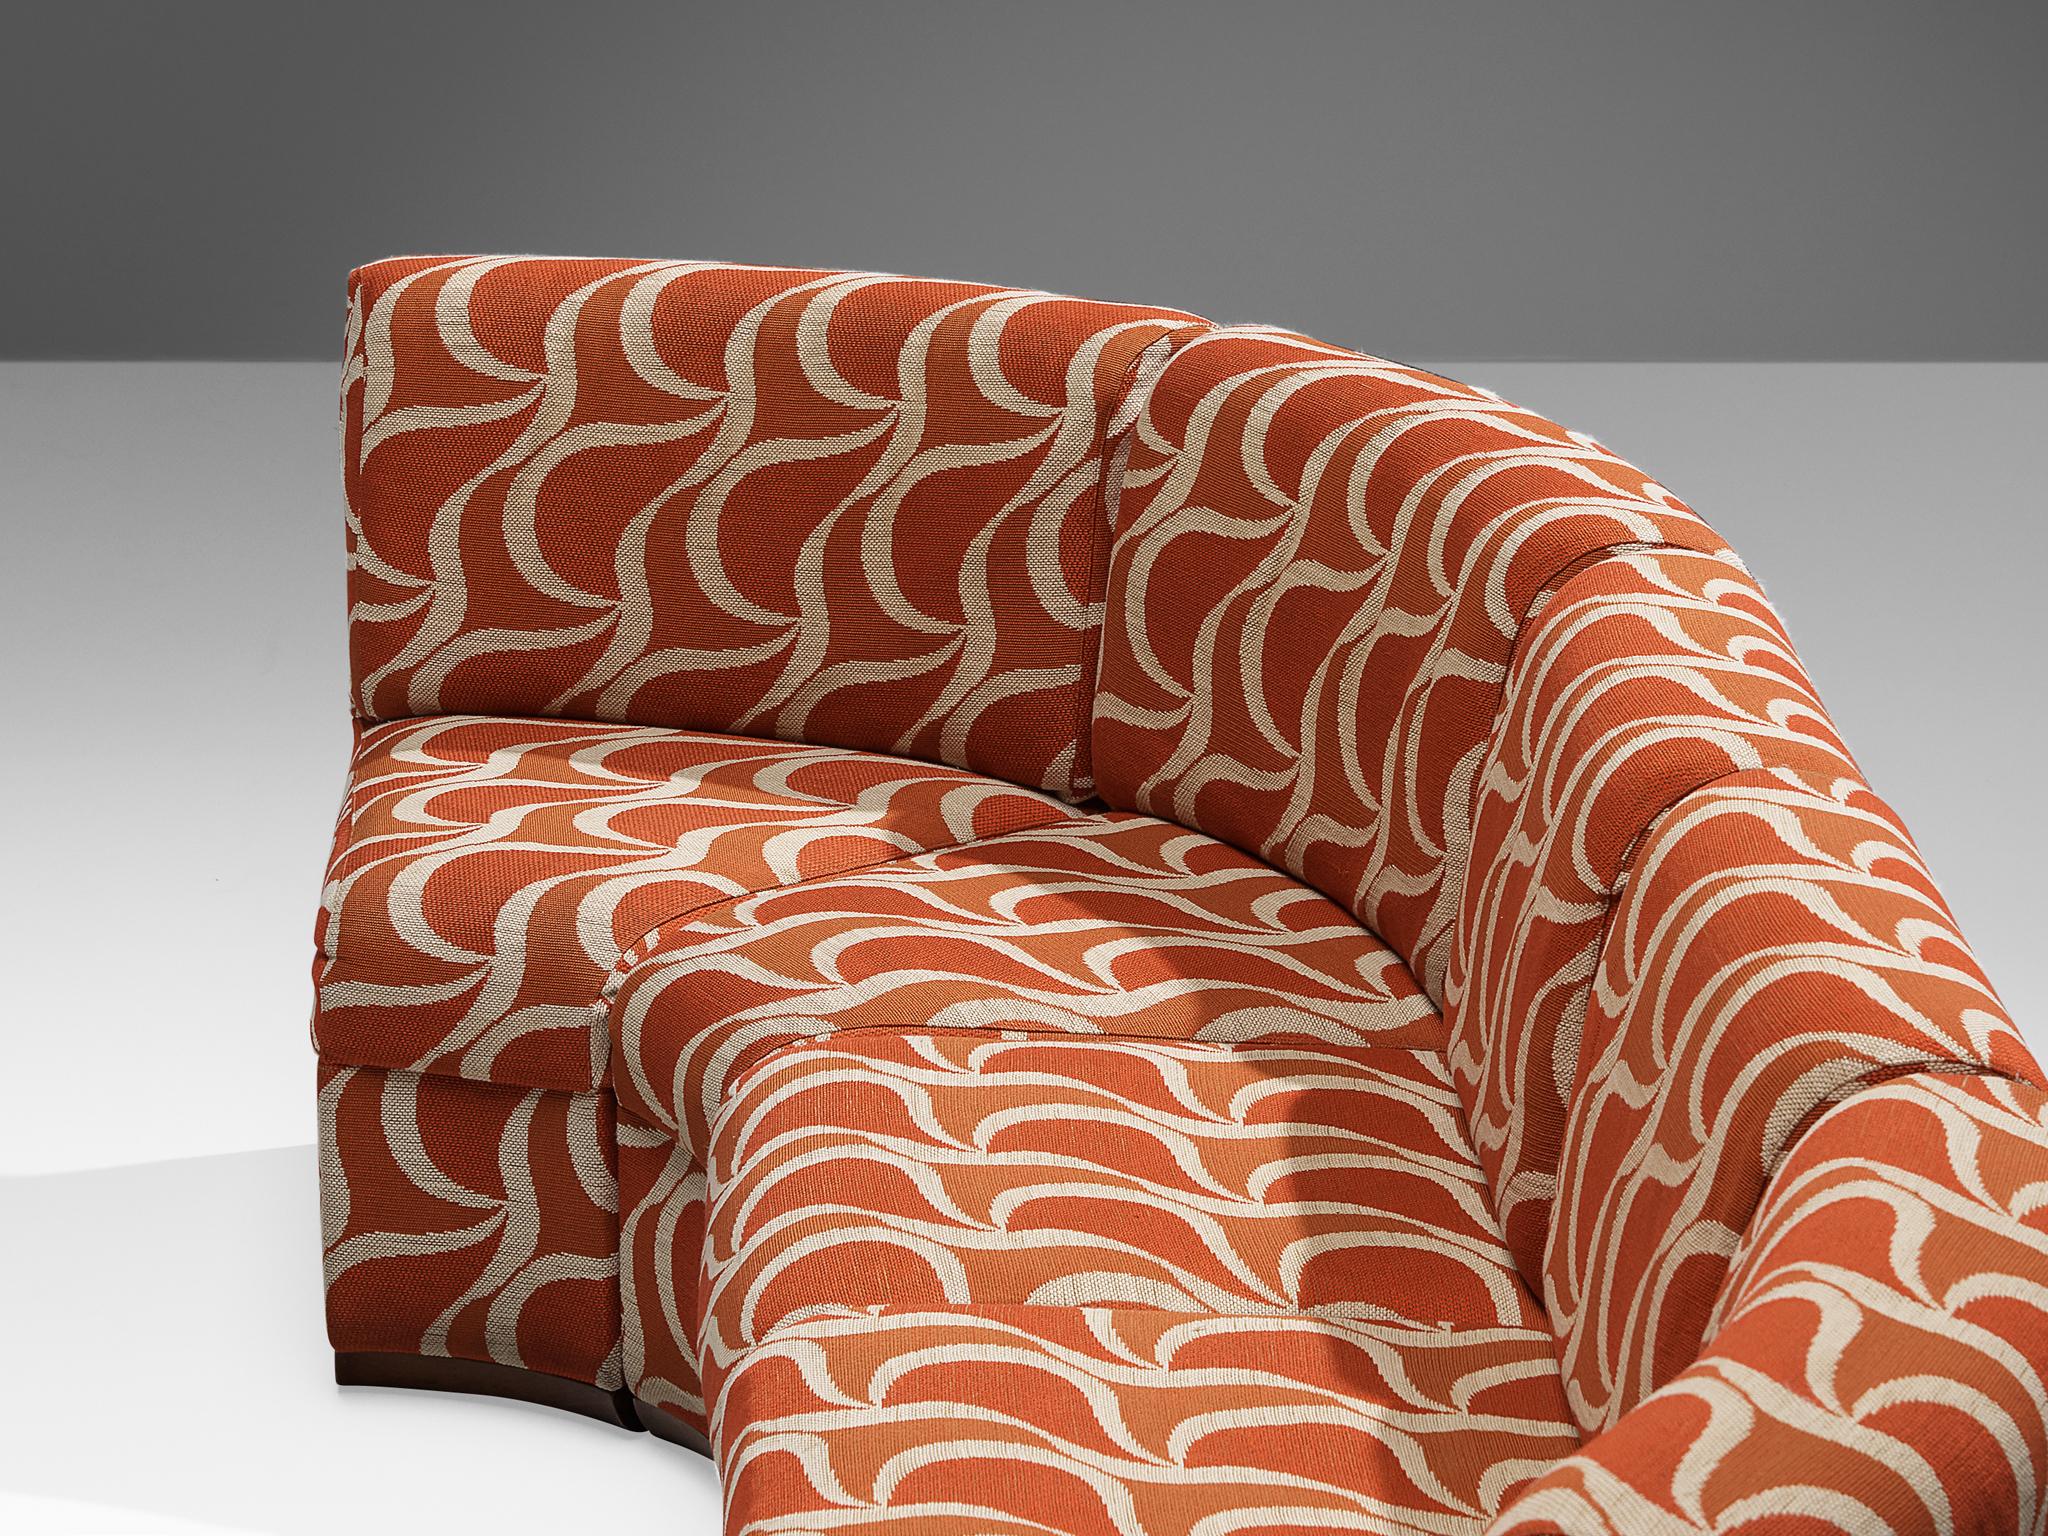 Late 20th Century Italian Sectional Sofa in Red Orange Patterned Upholstery